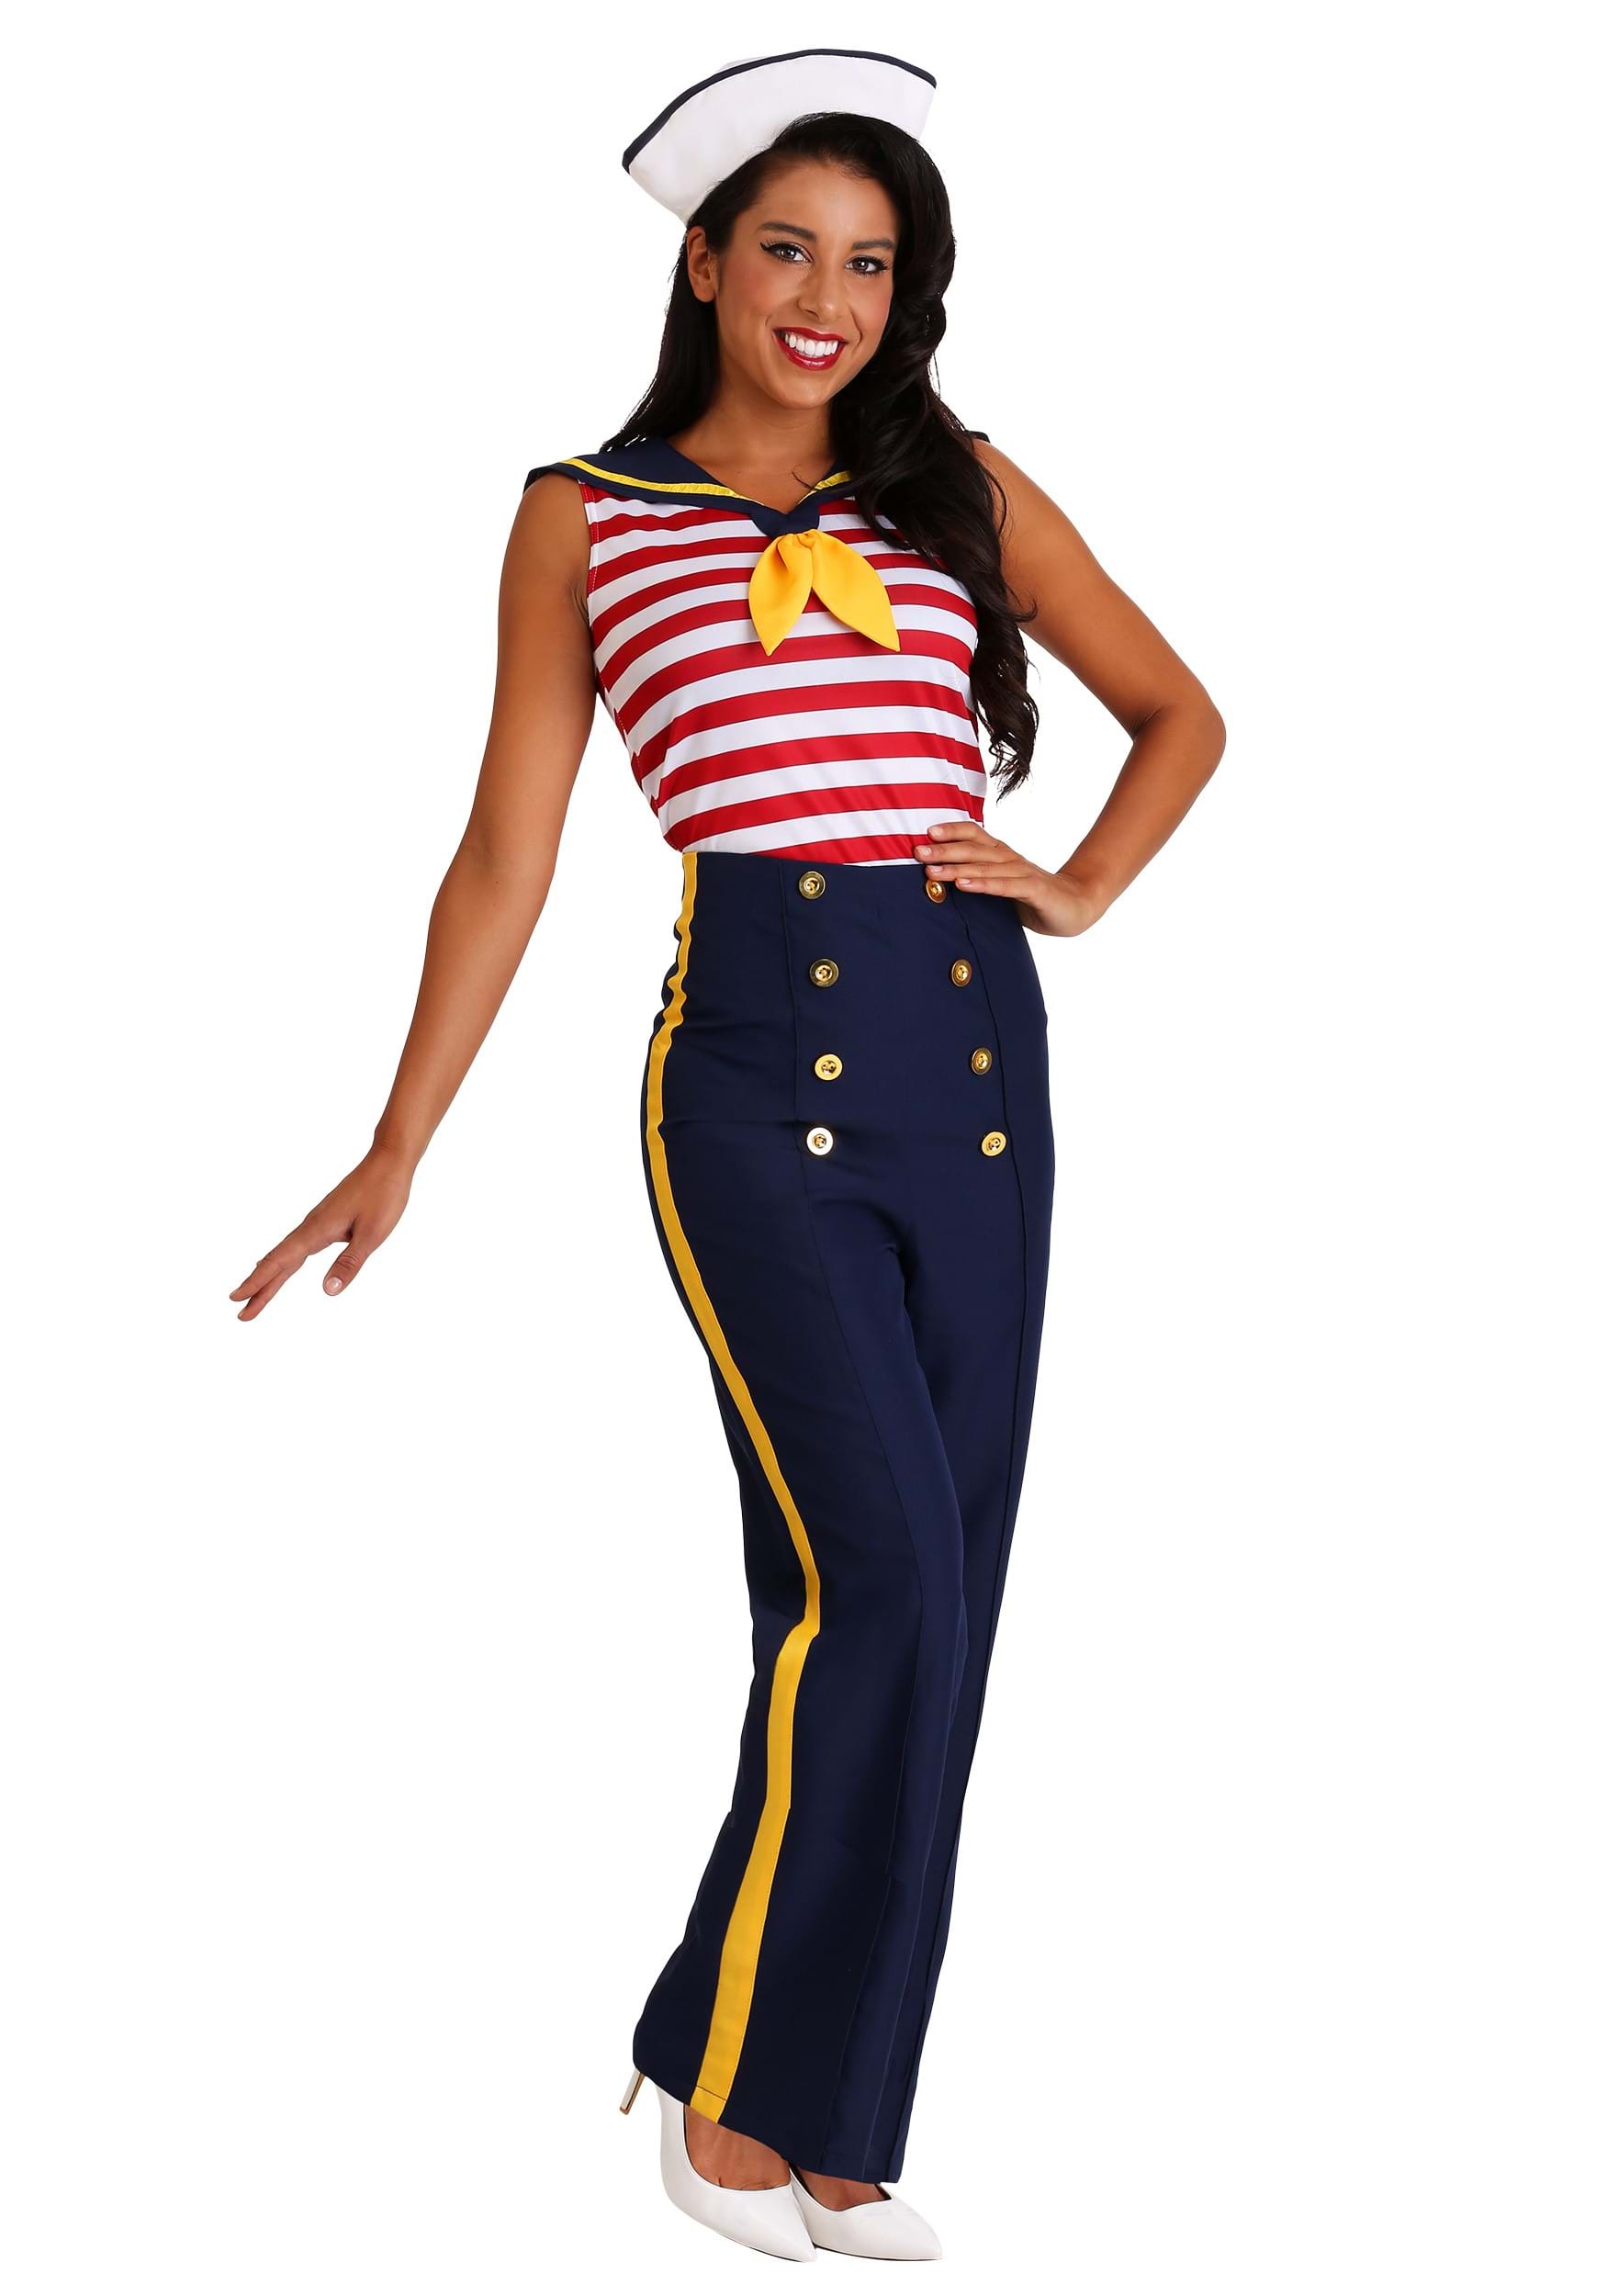 13.) Exclusive Women's Perfect Pin Up Sailor Costume